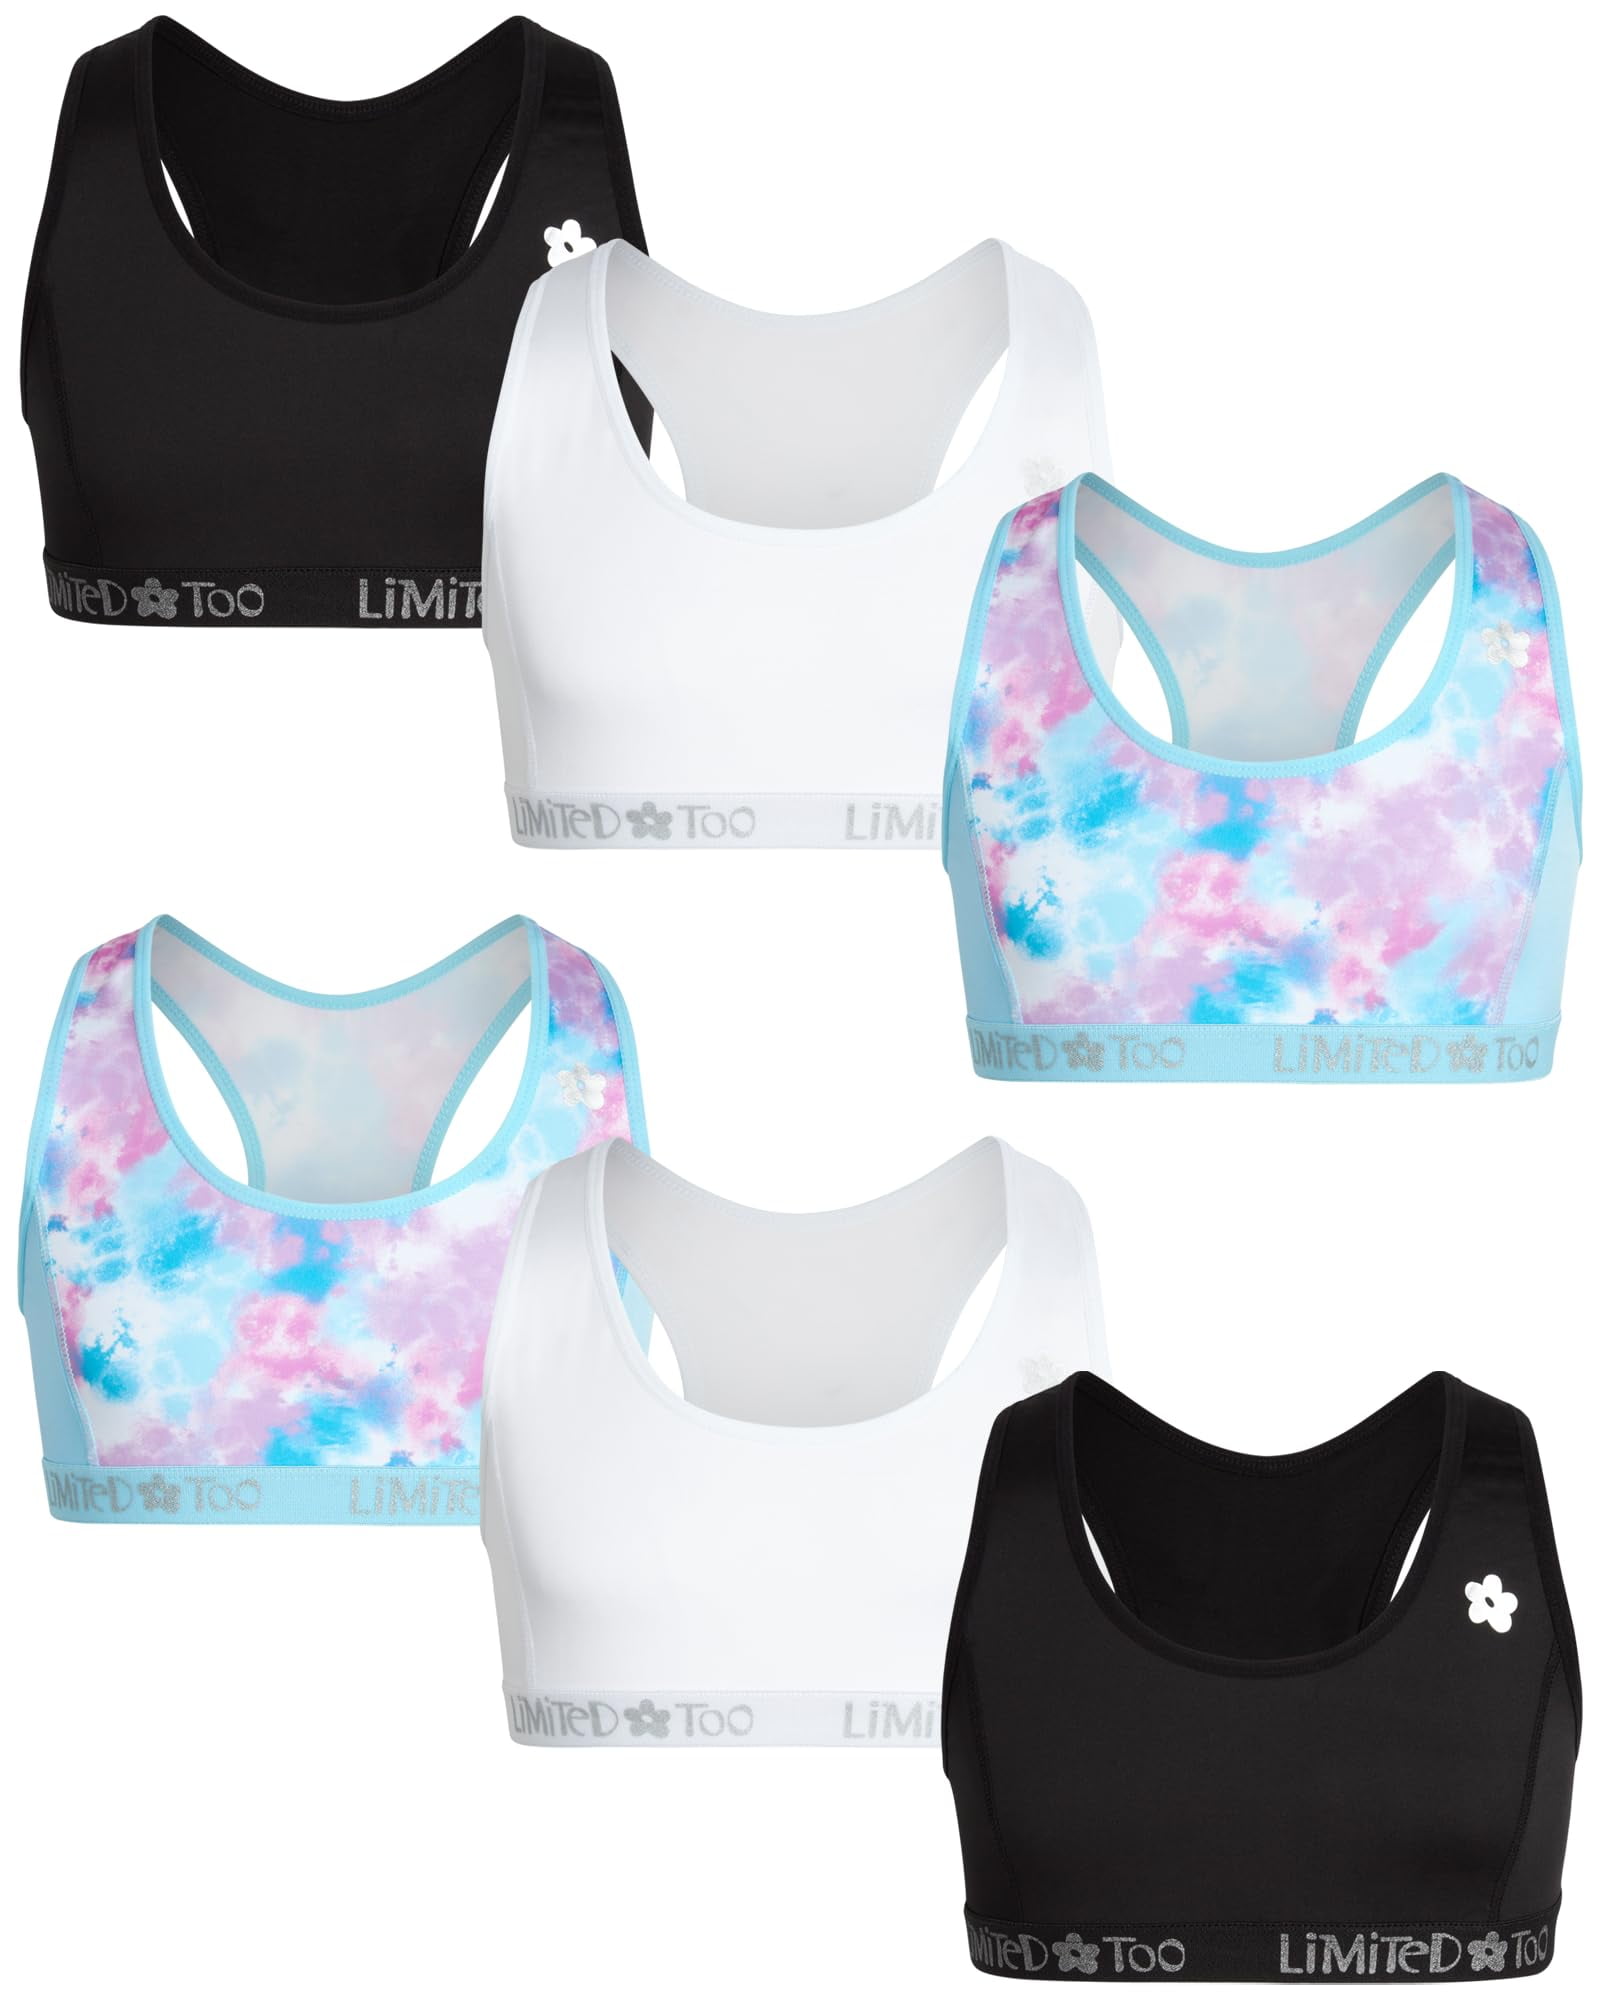 Assorted Wear Two Ways Spin Camis, 3 Pack (Little Girls & Big Girls) 